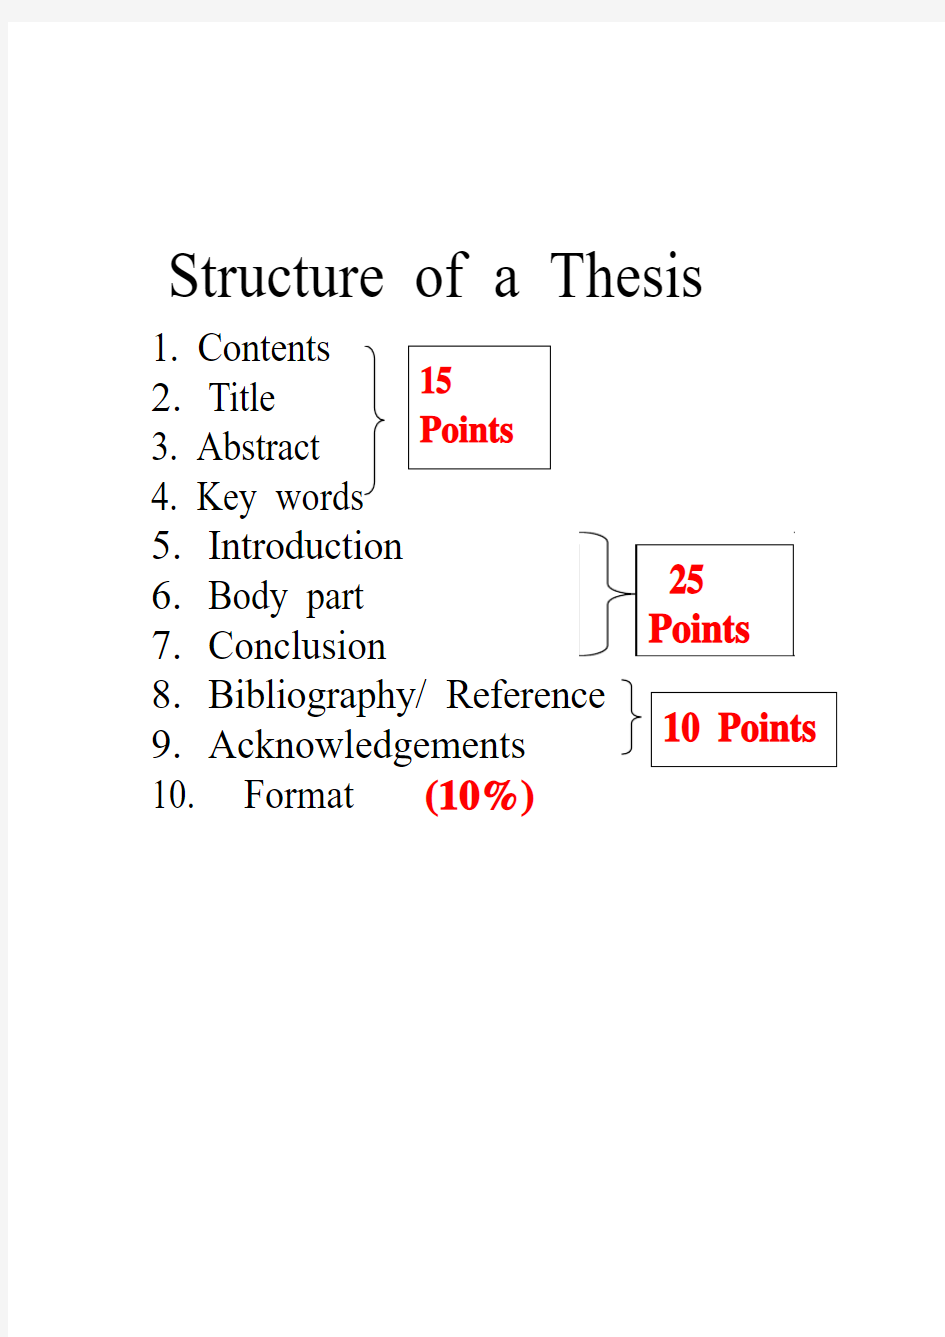 Structure of a thesis